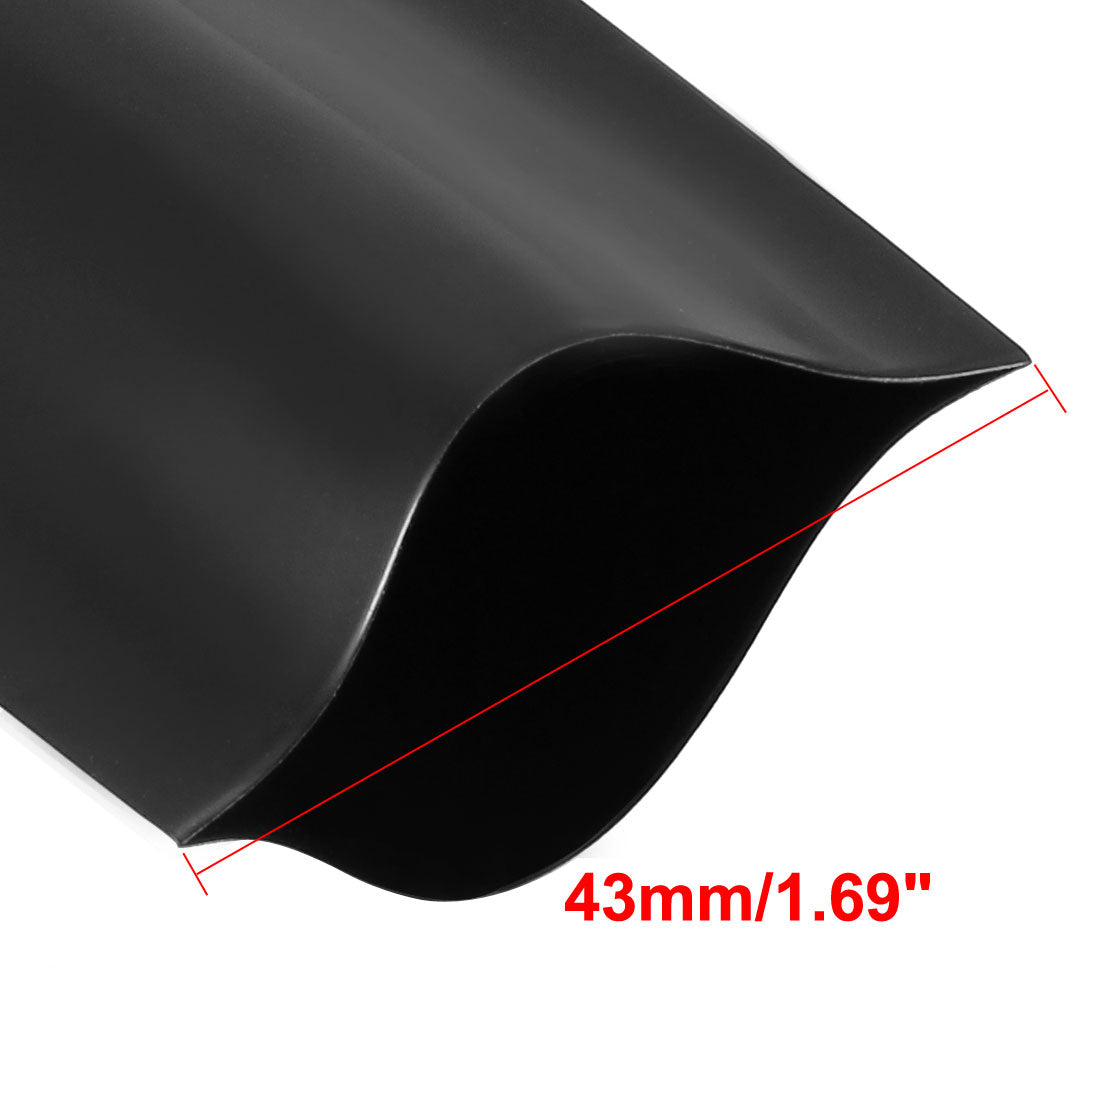 uxcell Uxcell PVC Heat Shrink Tubing 43mm Flat Width Heat Shrink Wrap for 26650 Power Supplies 5 Meters Length, Black